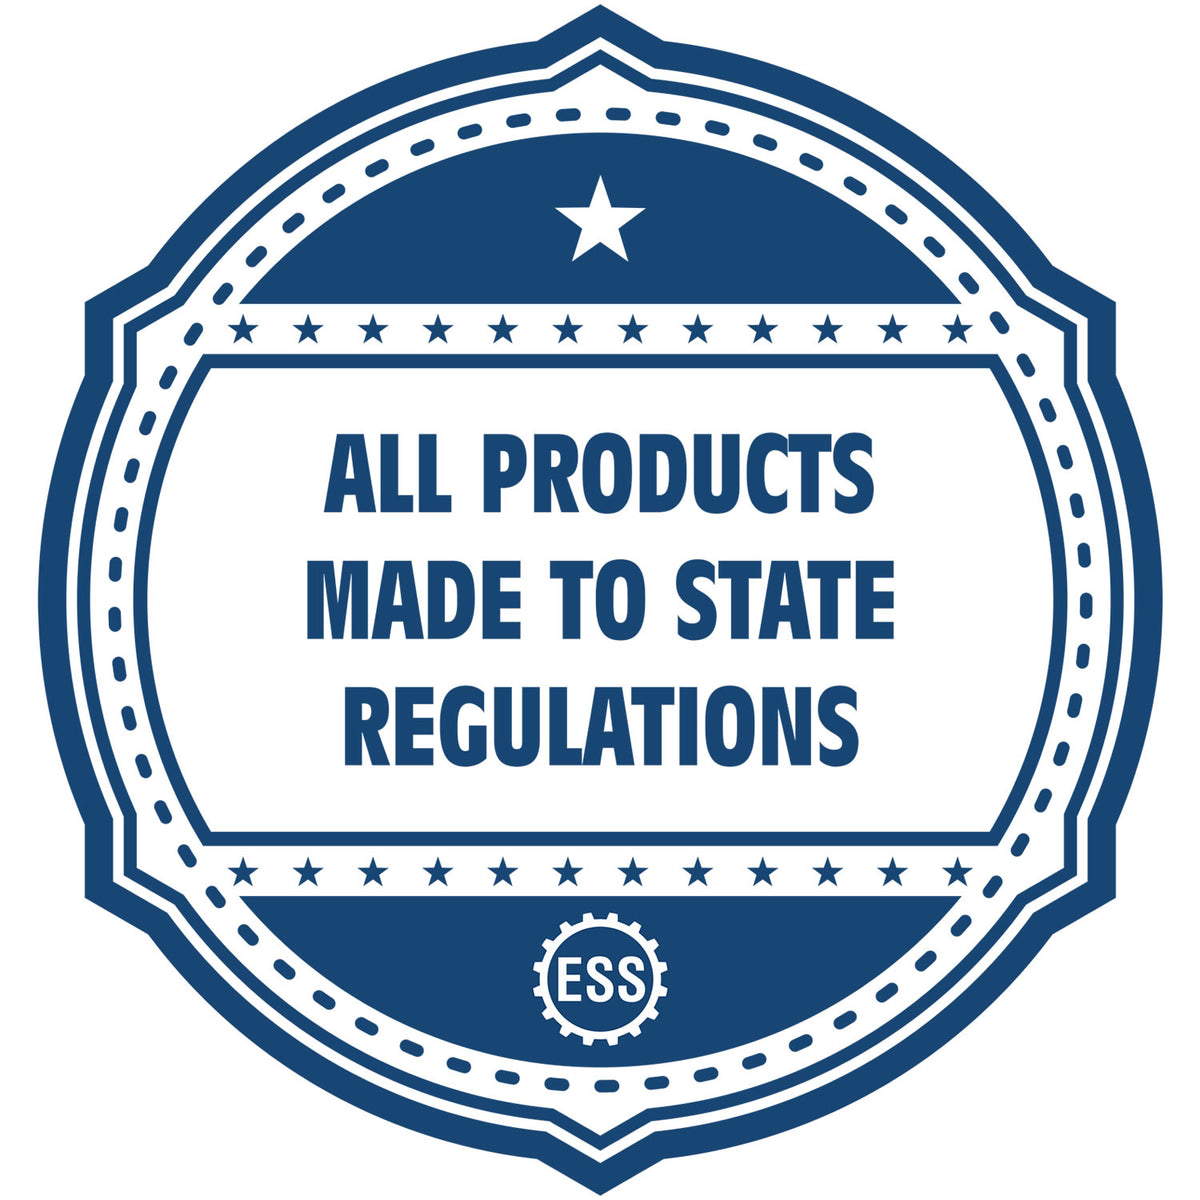 An icon or badge element for the Extended Long Reach Pennsylvania Architect Seal Embosser showing that this product is made in compliance with state regulations.